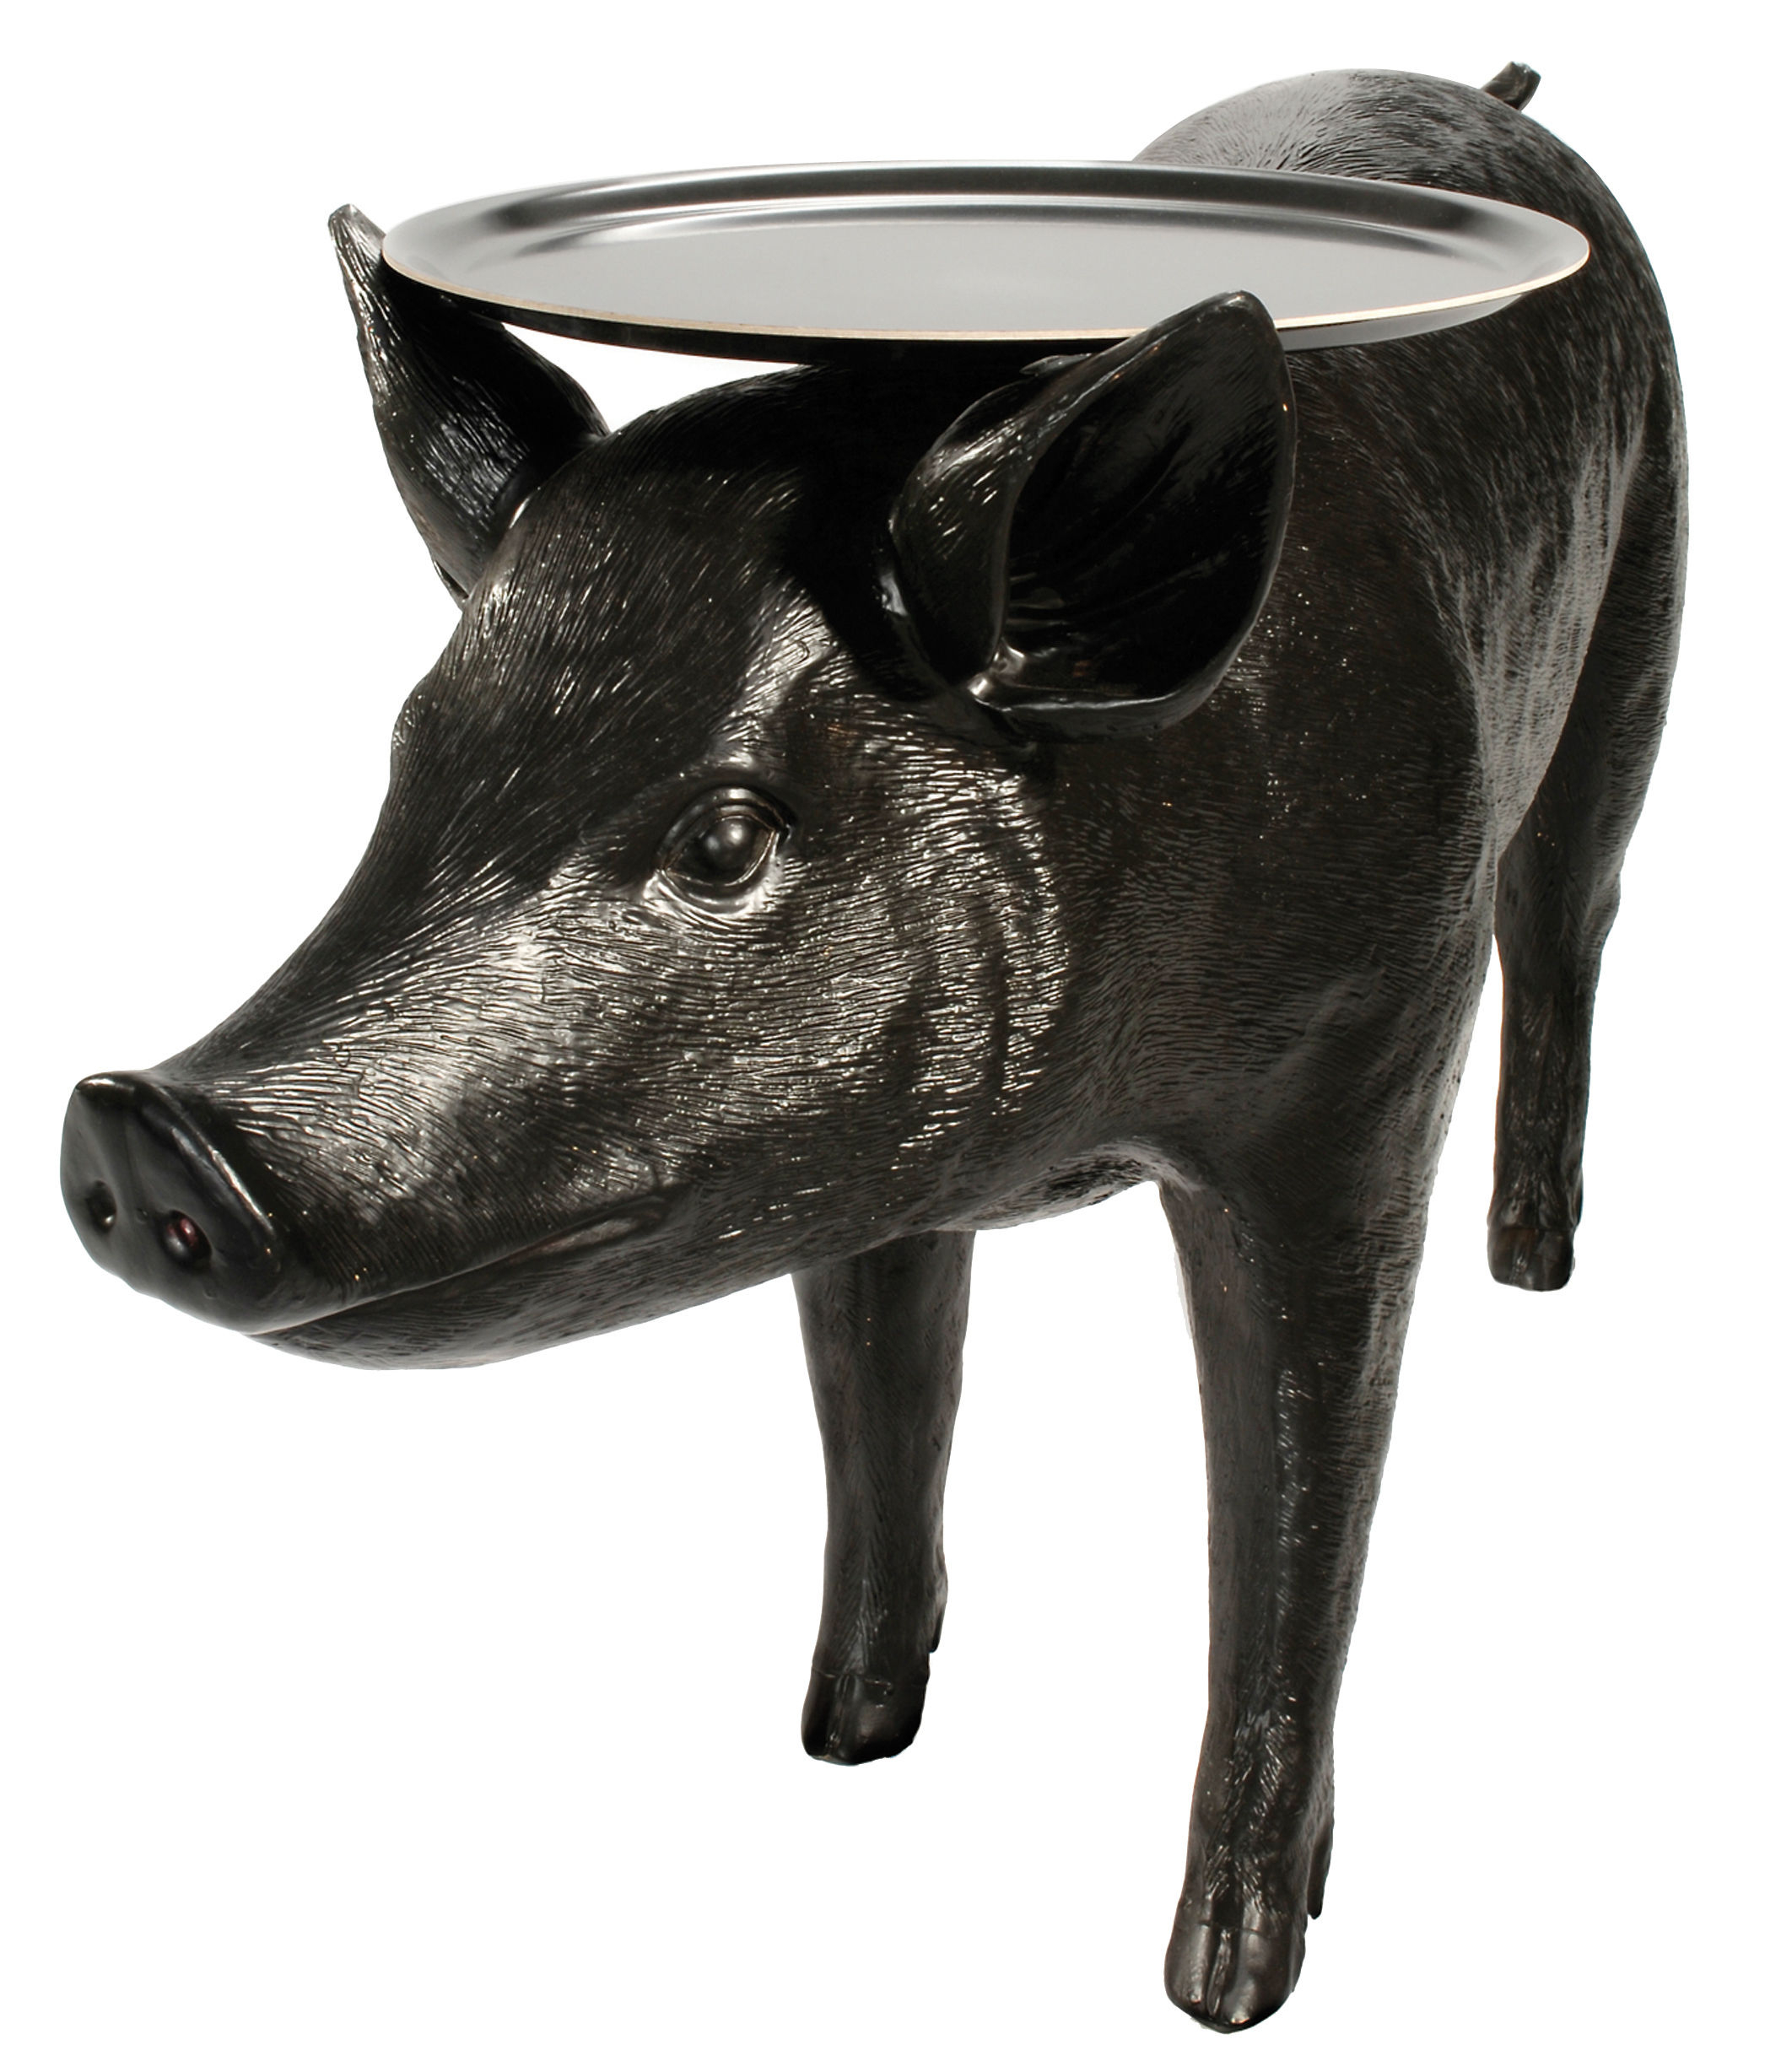 Coffee Table Pig Table Moooi Black Made In Design Uk for dimensions 2092 X 2456